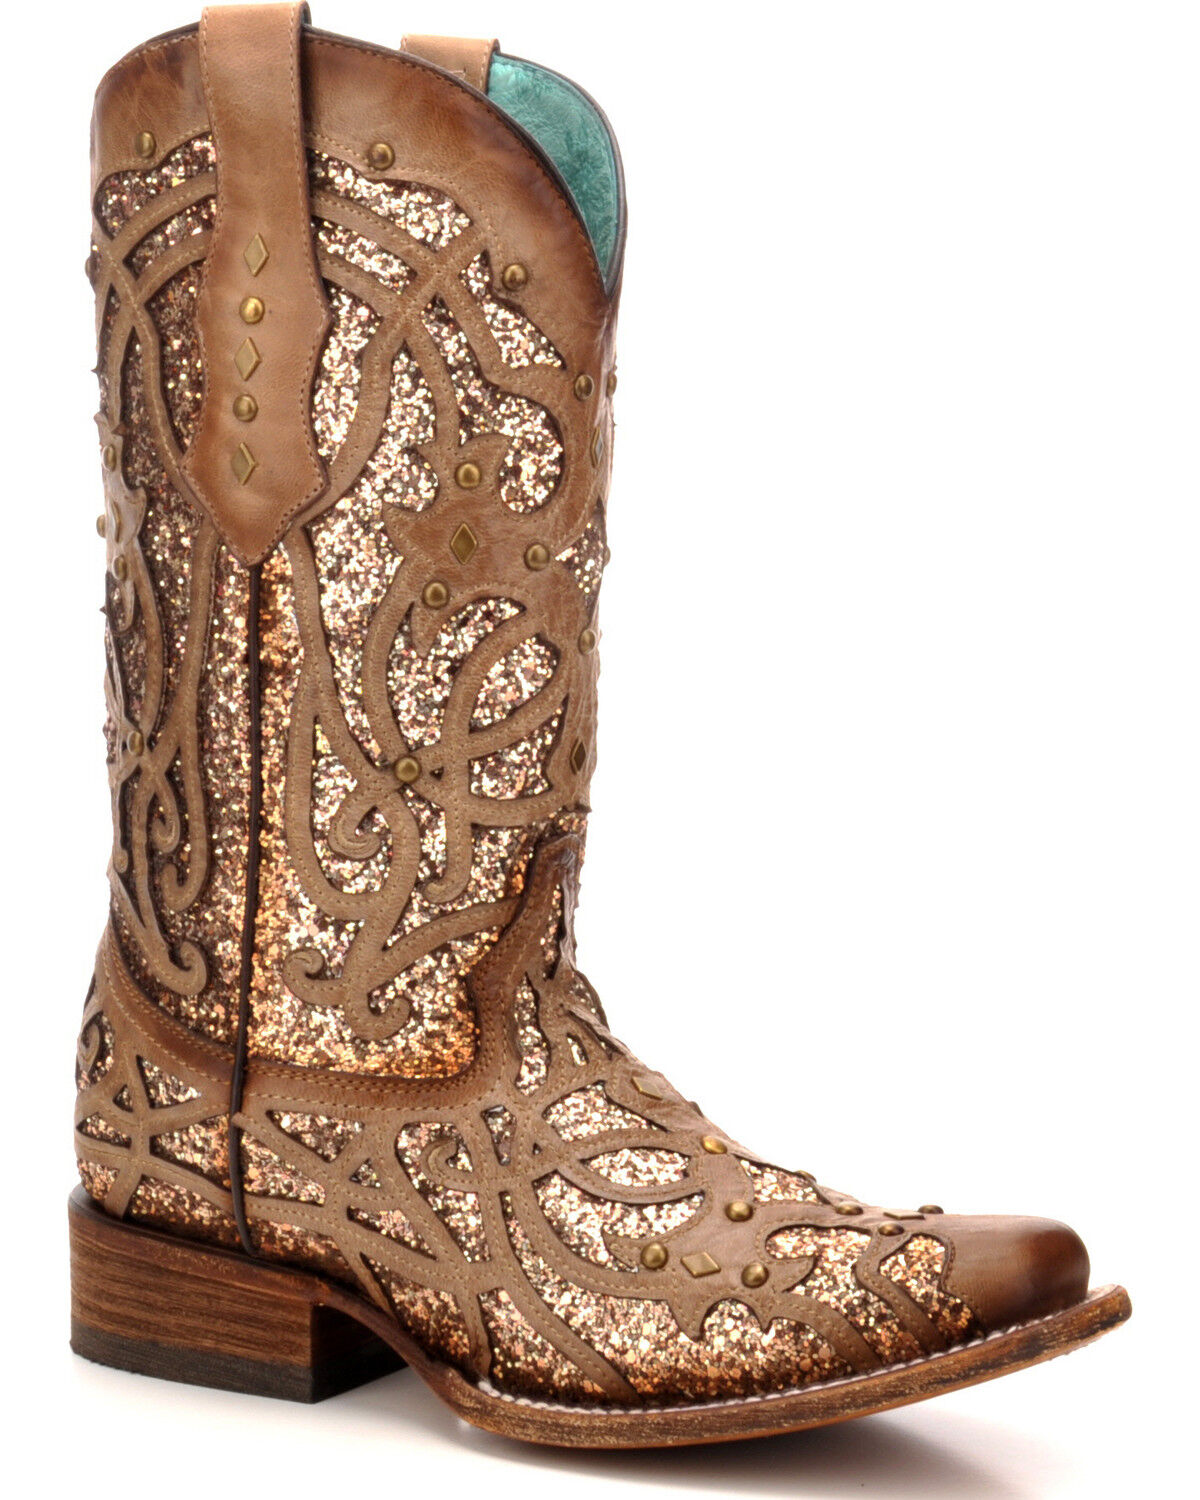 corral turquoise inlay boots